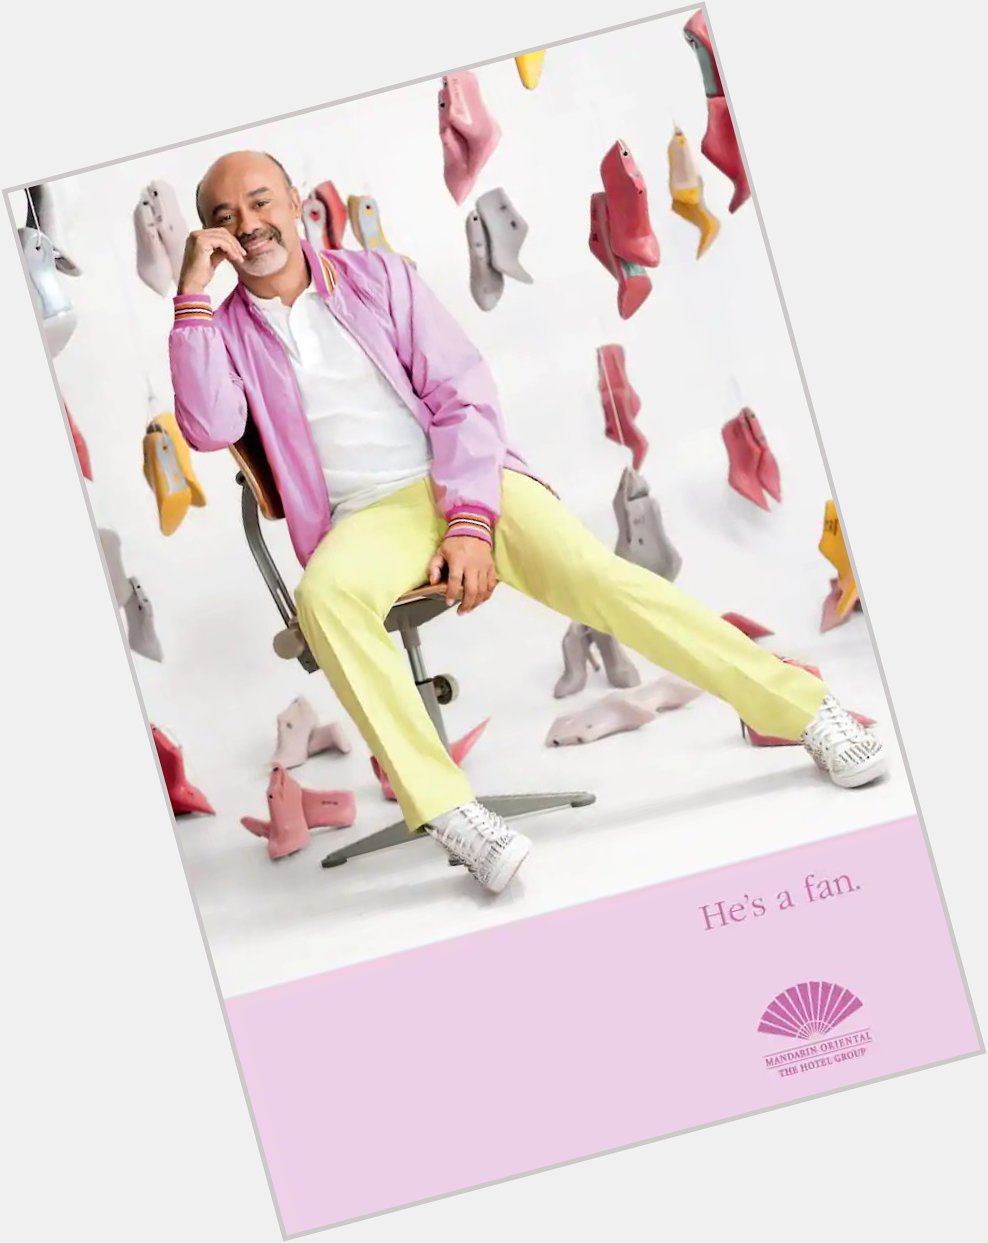 Happy birthday, Mr. Christian Louboutin, our celebrity fan and the internationally renowned shoe designer! 